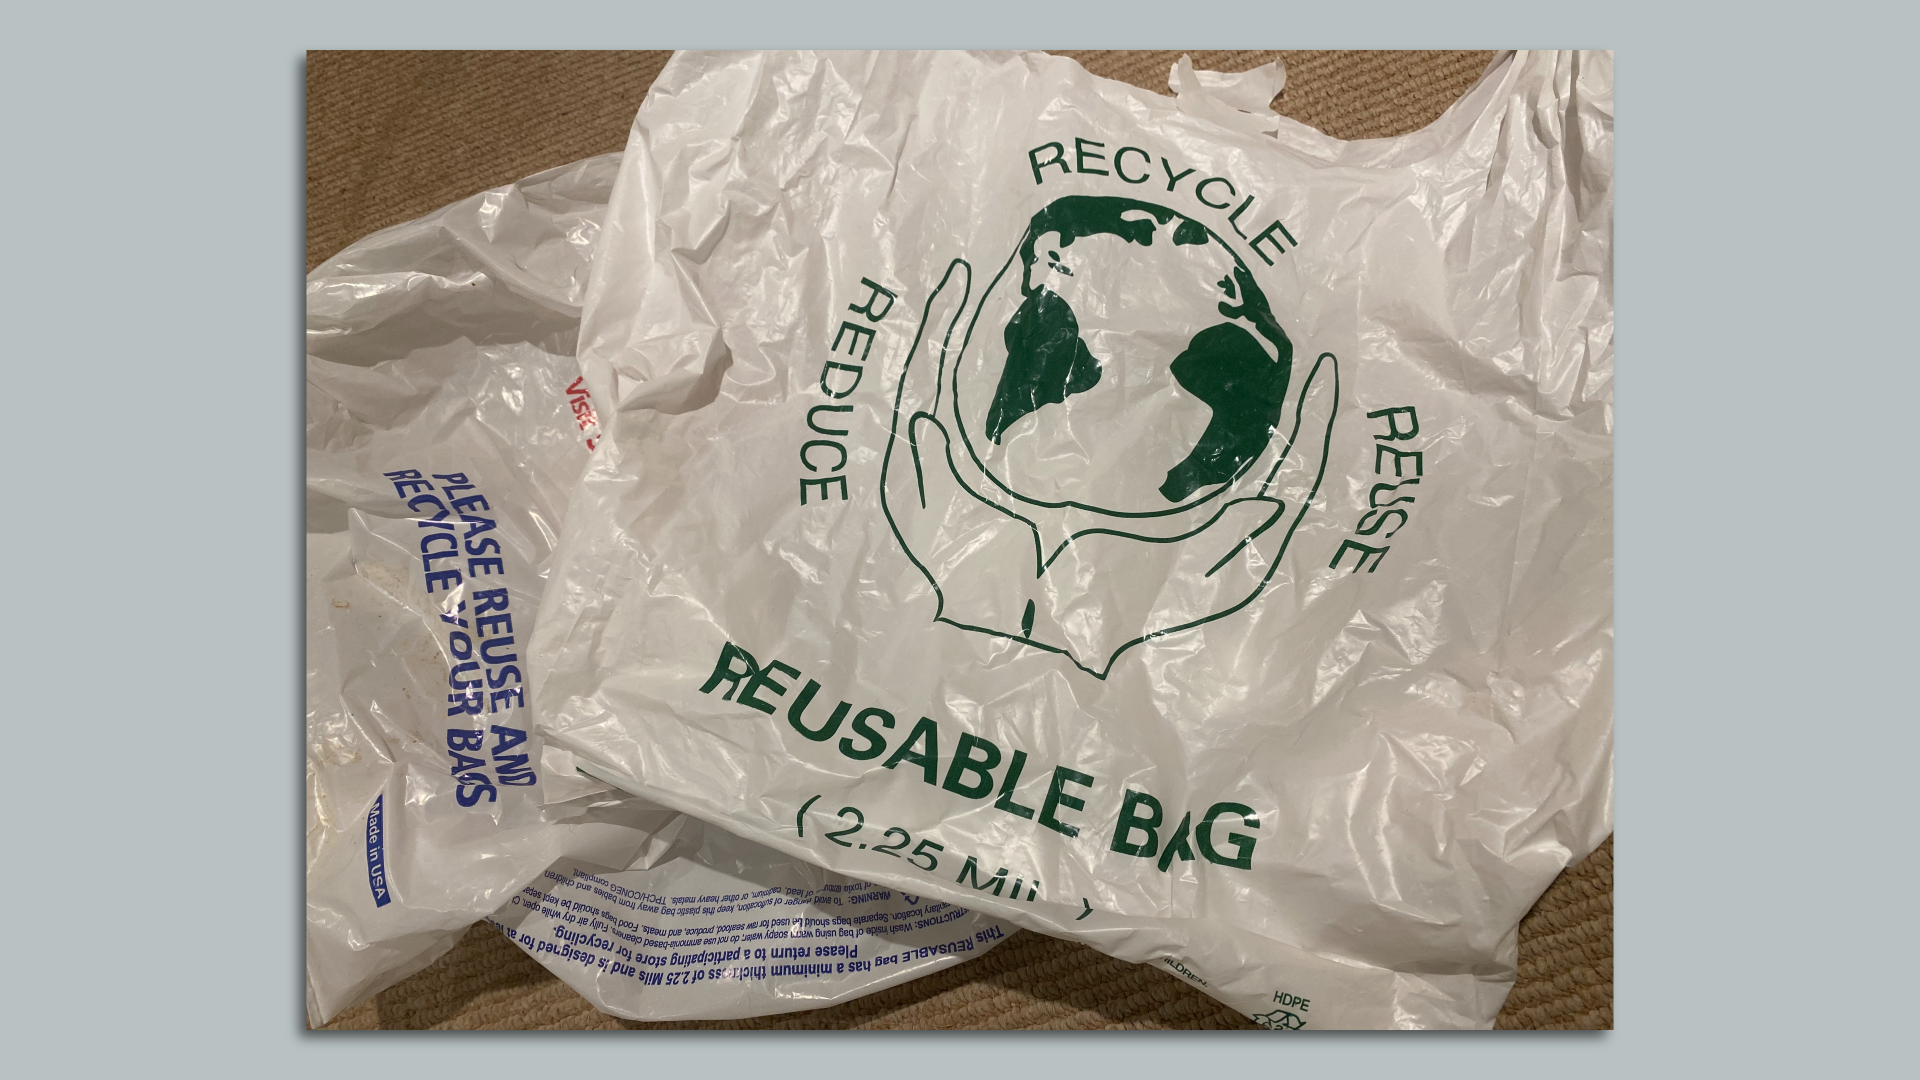 Garbage bag recycling container. Reusable recycle bags for paper